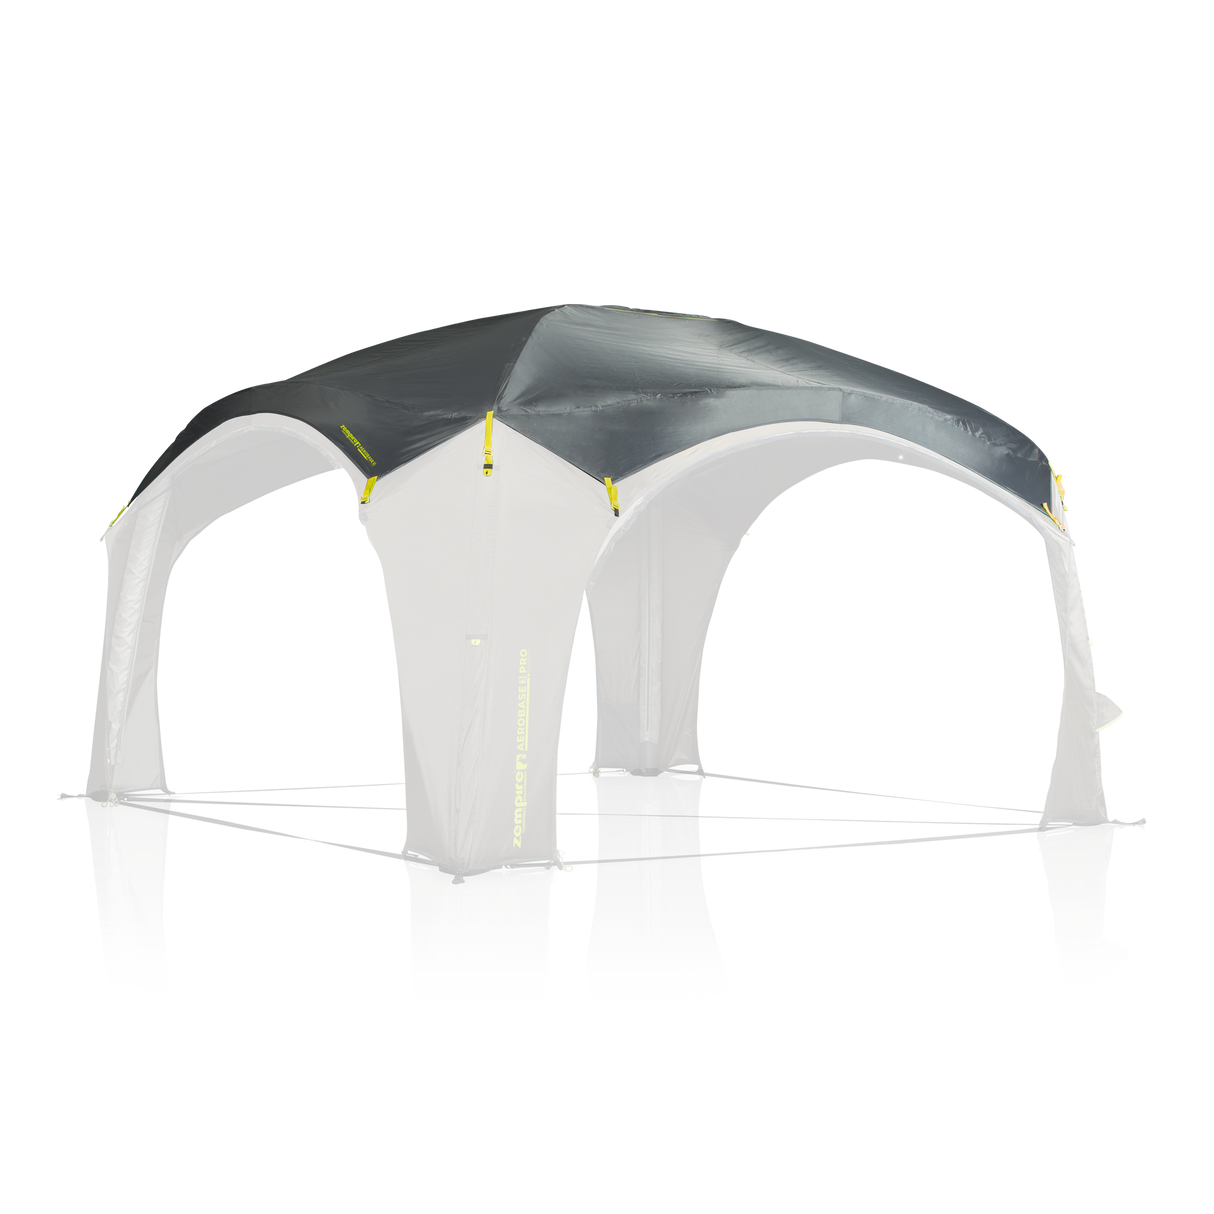 Zempire Aerobase 3 Roof Cover